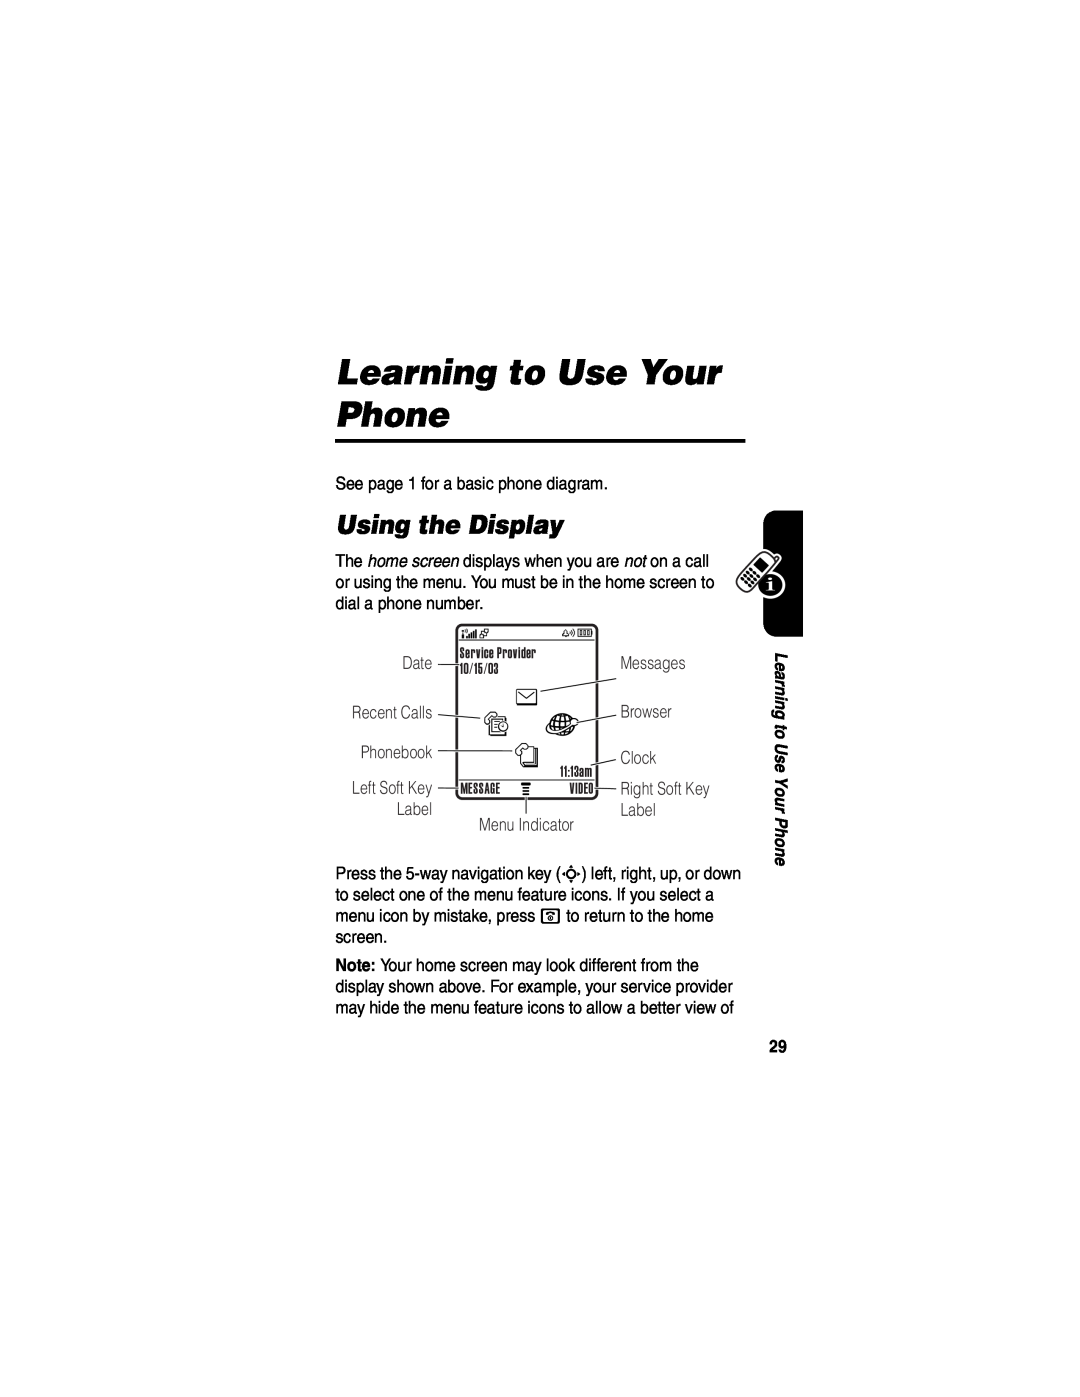 Motorola V635 manual Learning to Use Your Phone, Using the Display 